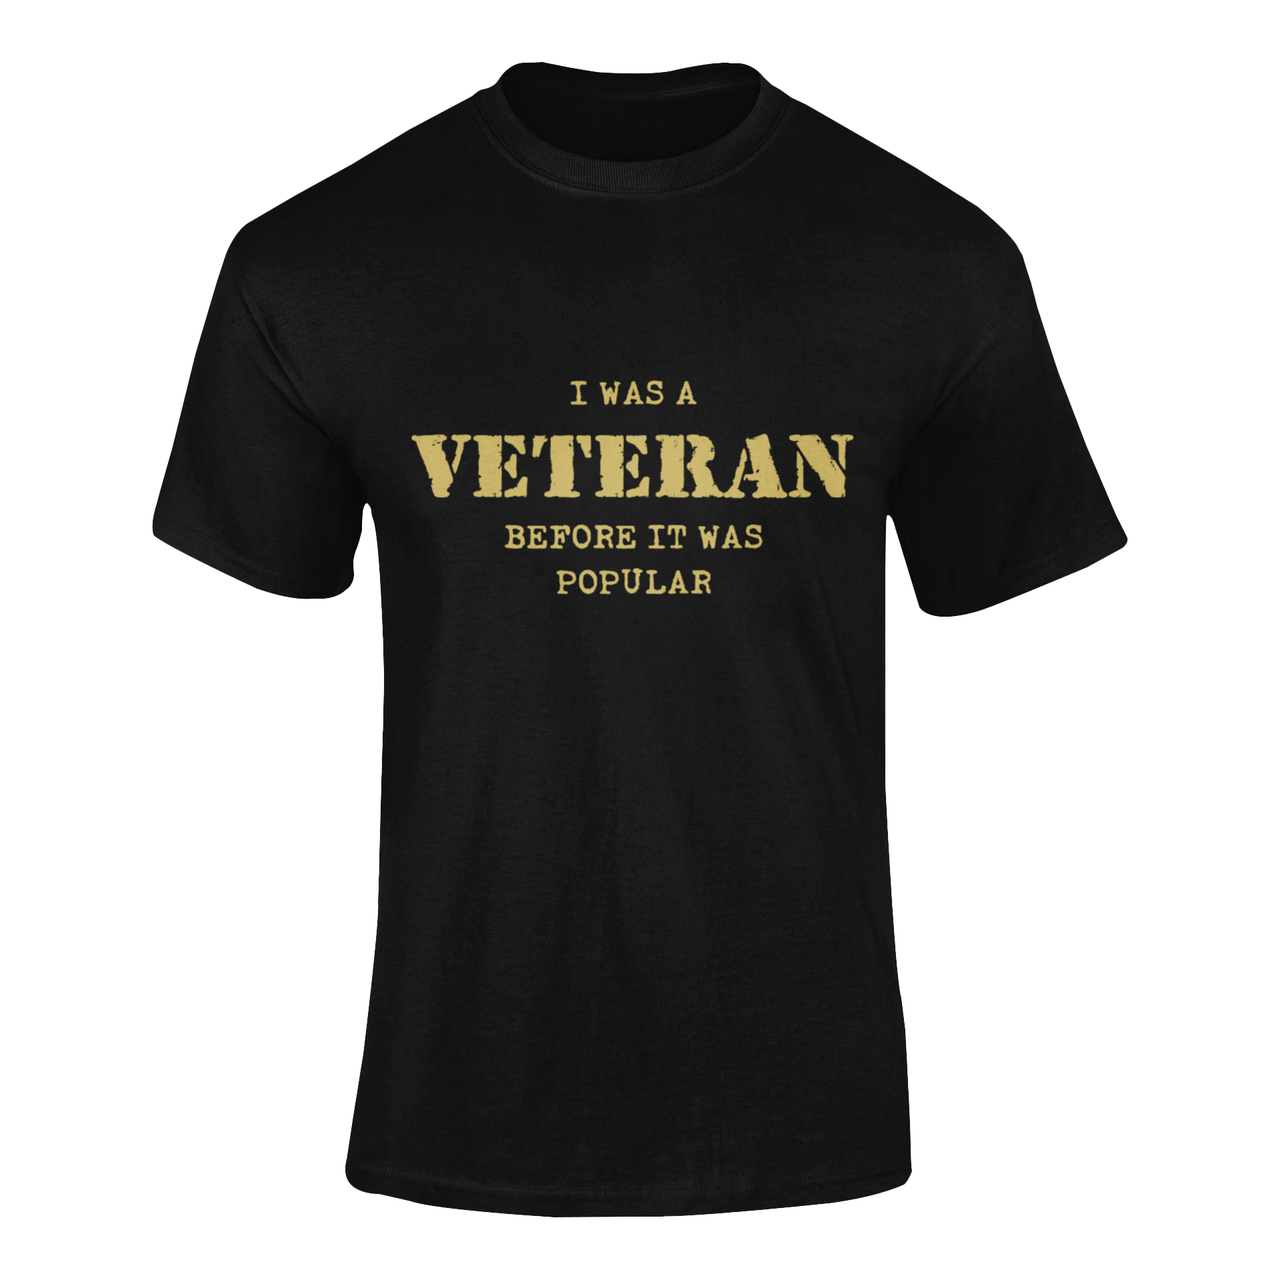 Military T-shirt - I Was a Veteran Before It Was Popular (Men)